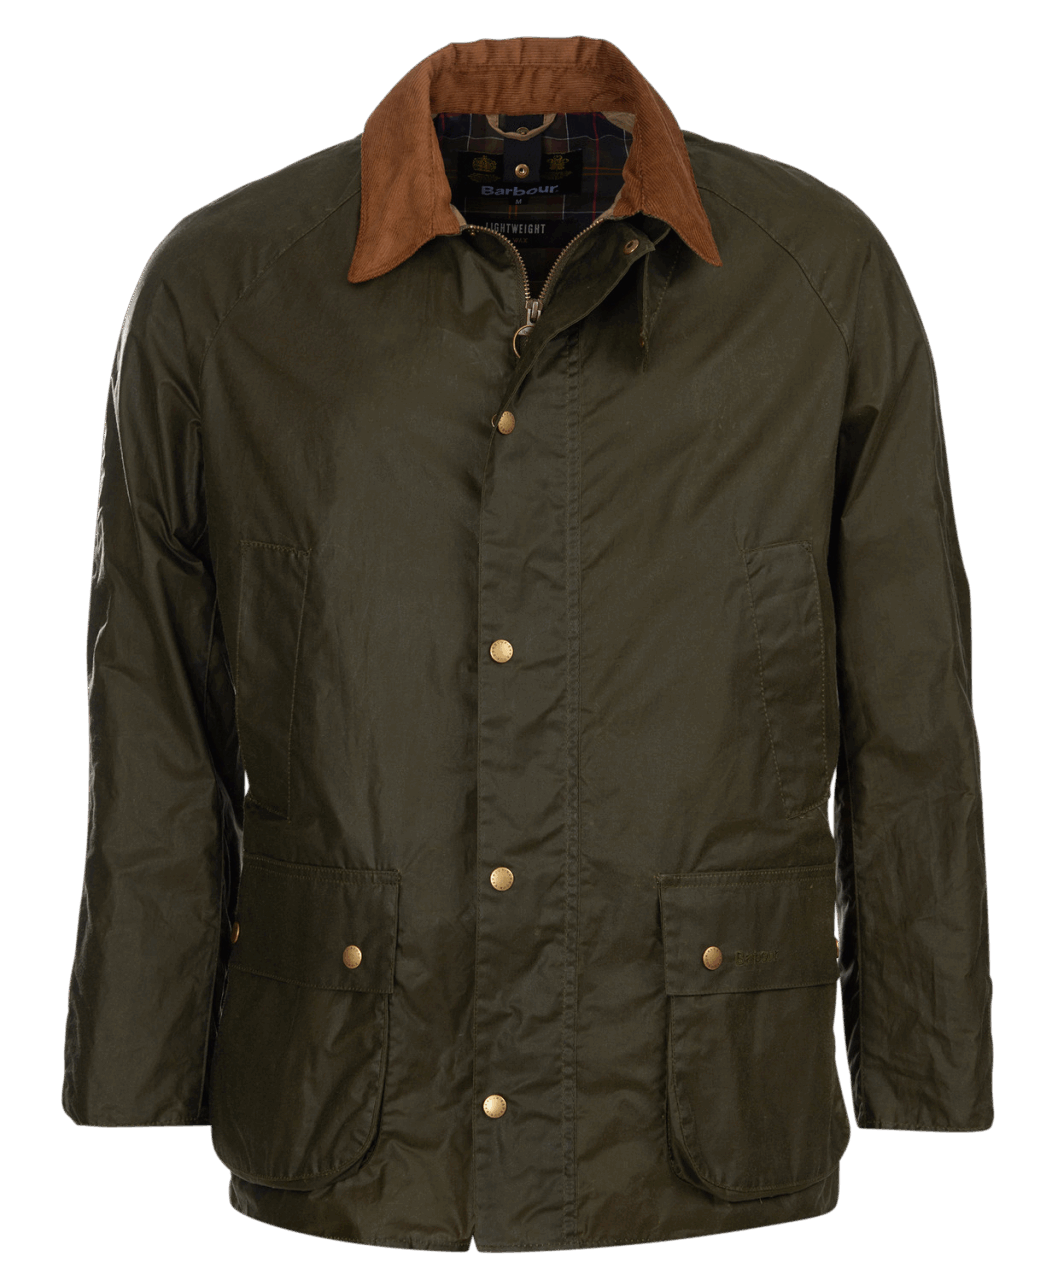 Barbour Lightweight Ashby Waxed Jacket - archive olive